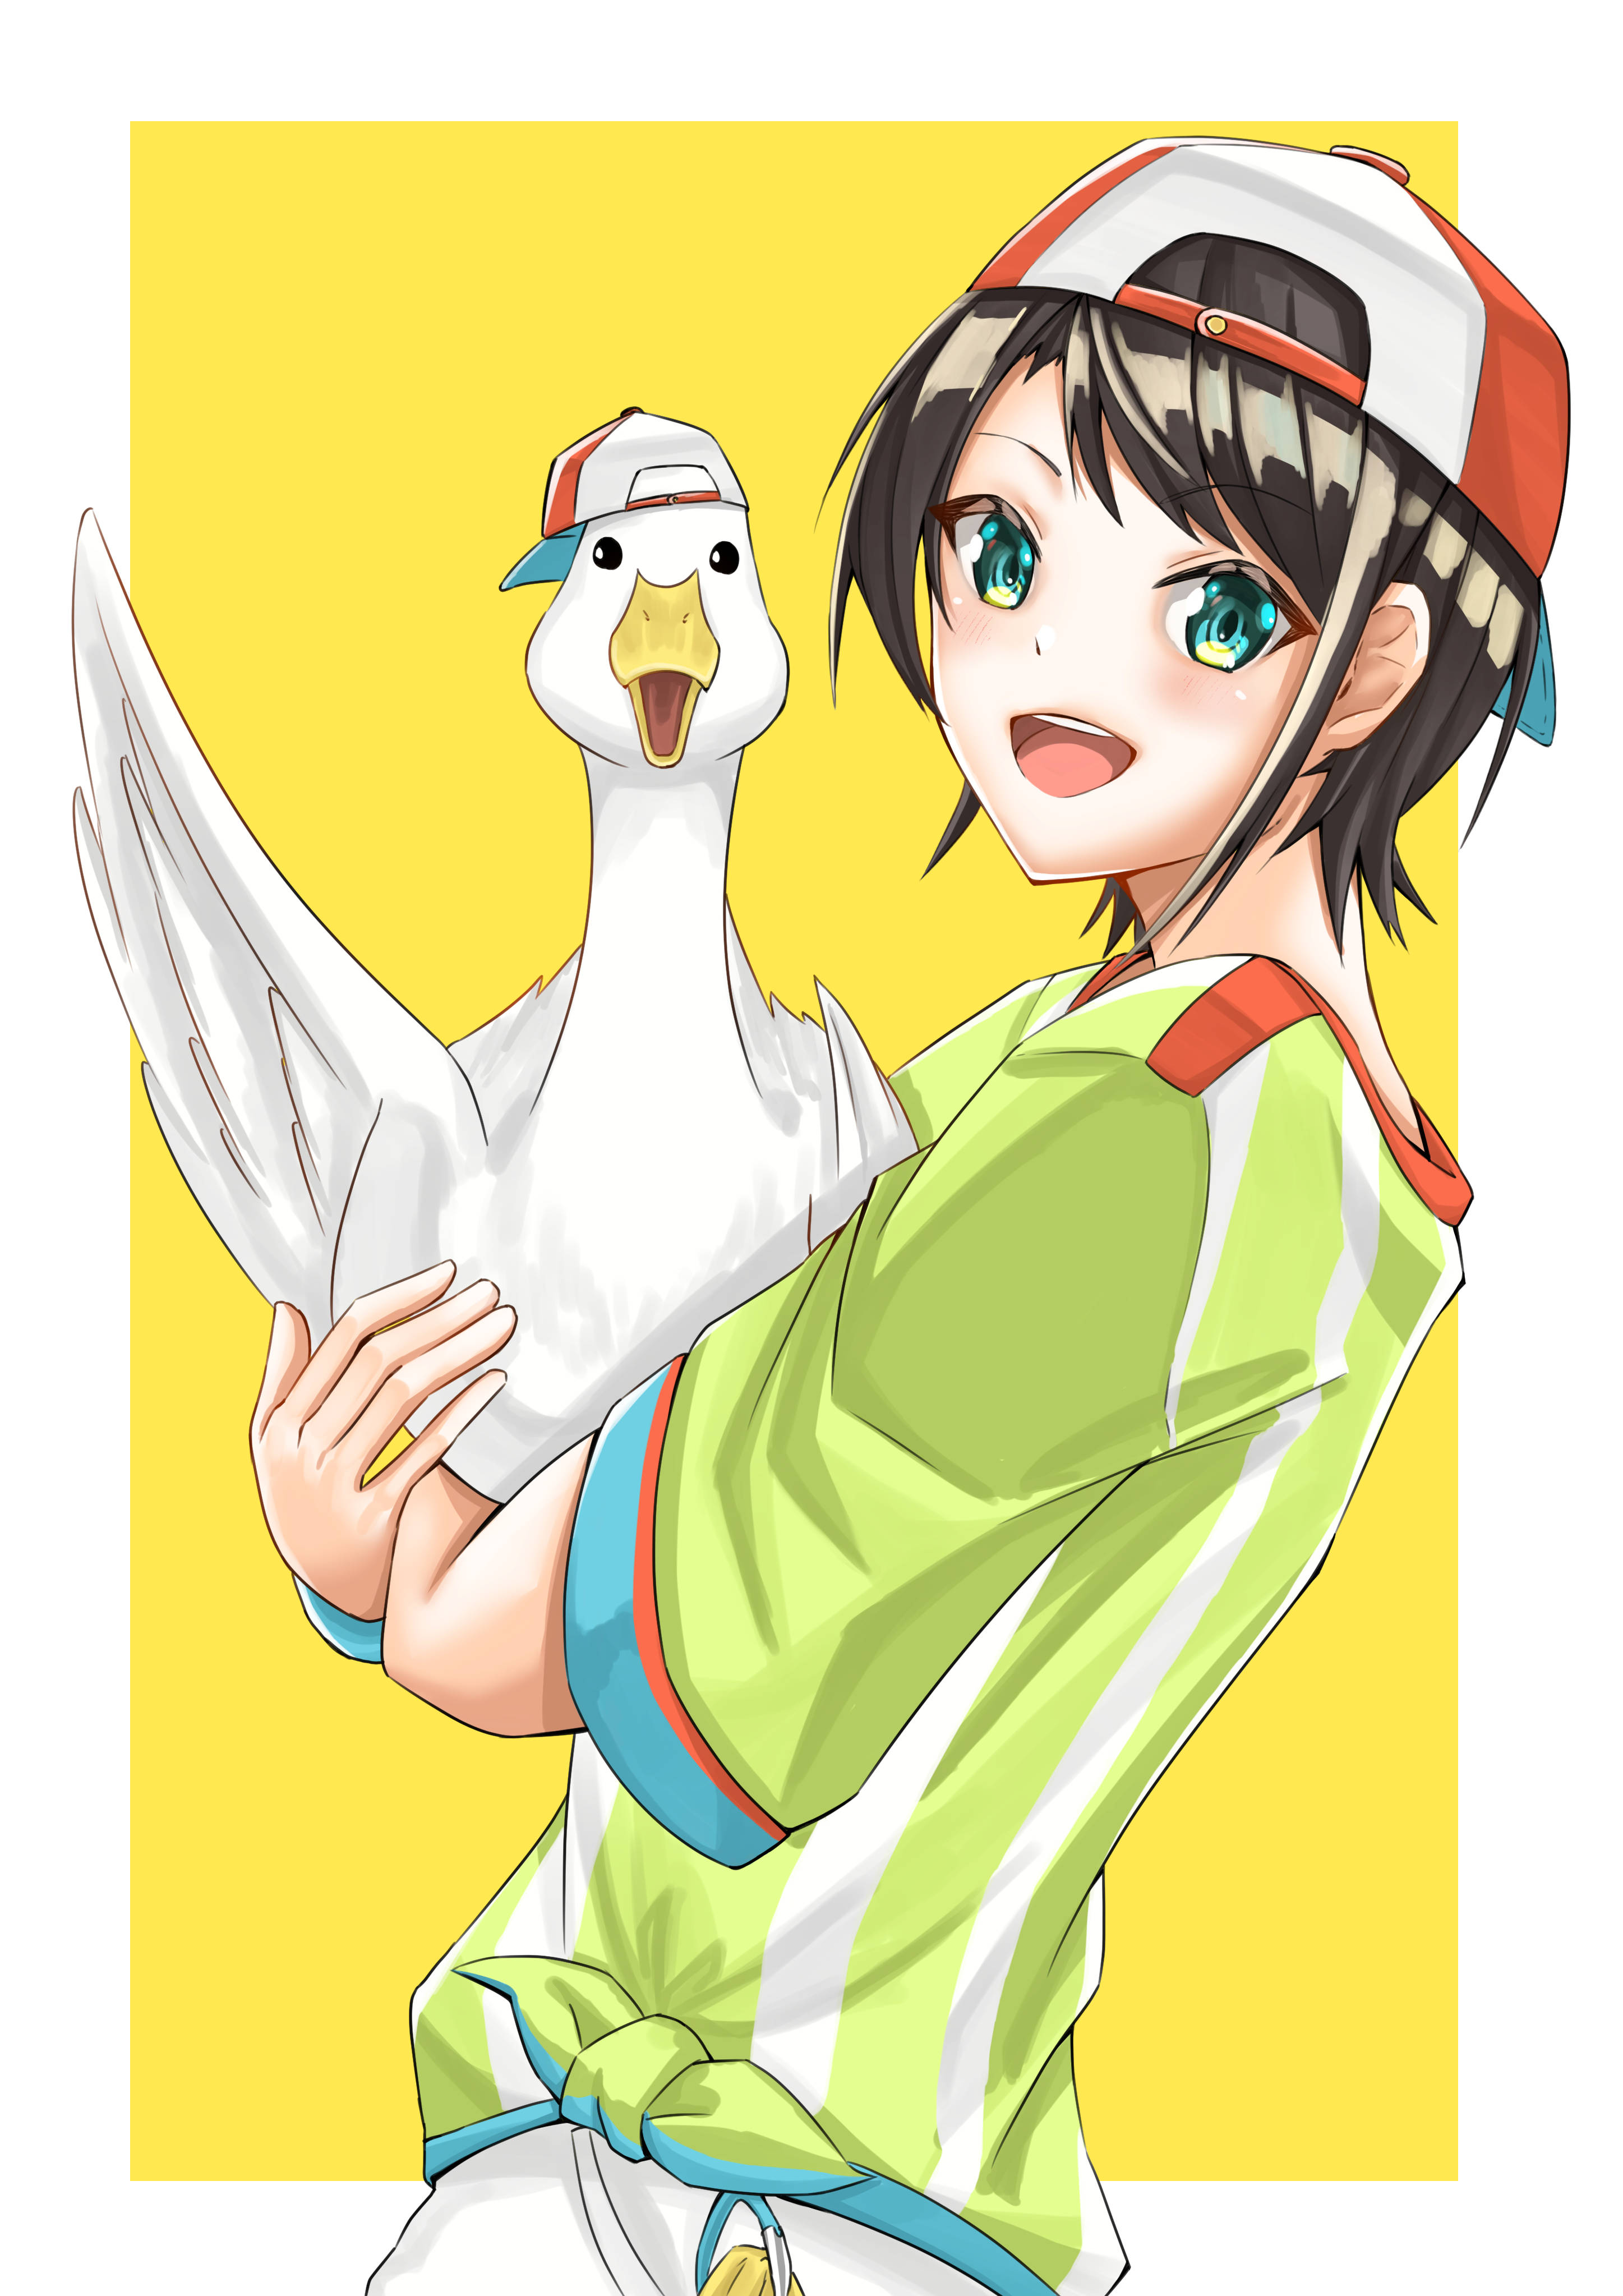 Anime Boy With Duck PFP Wallpaper